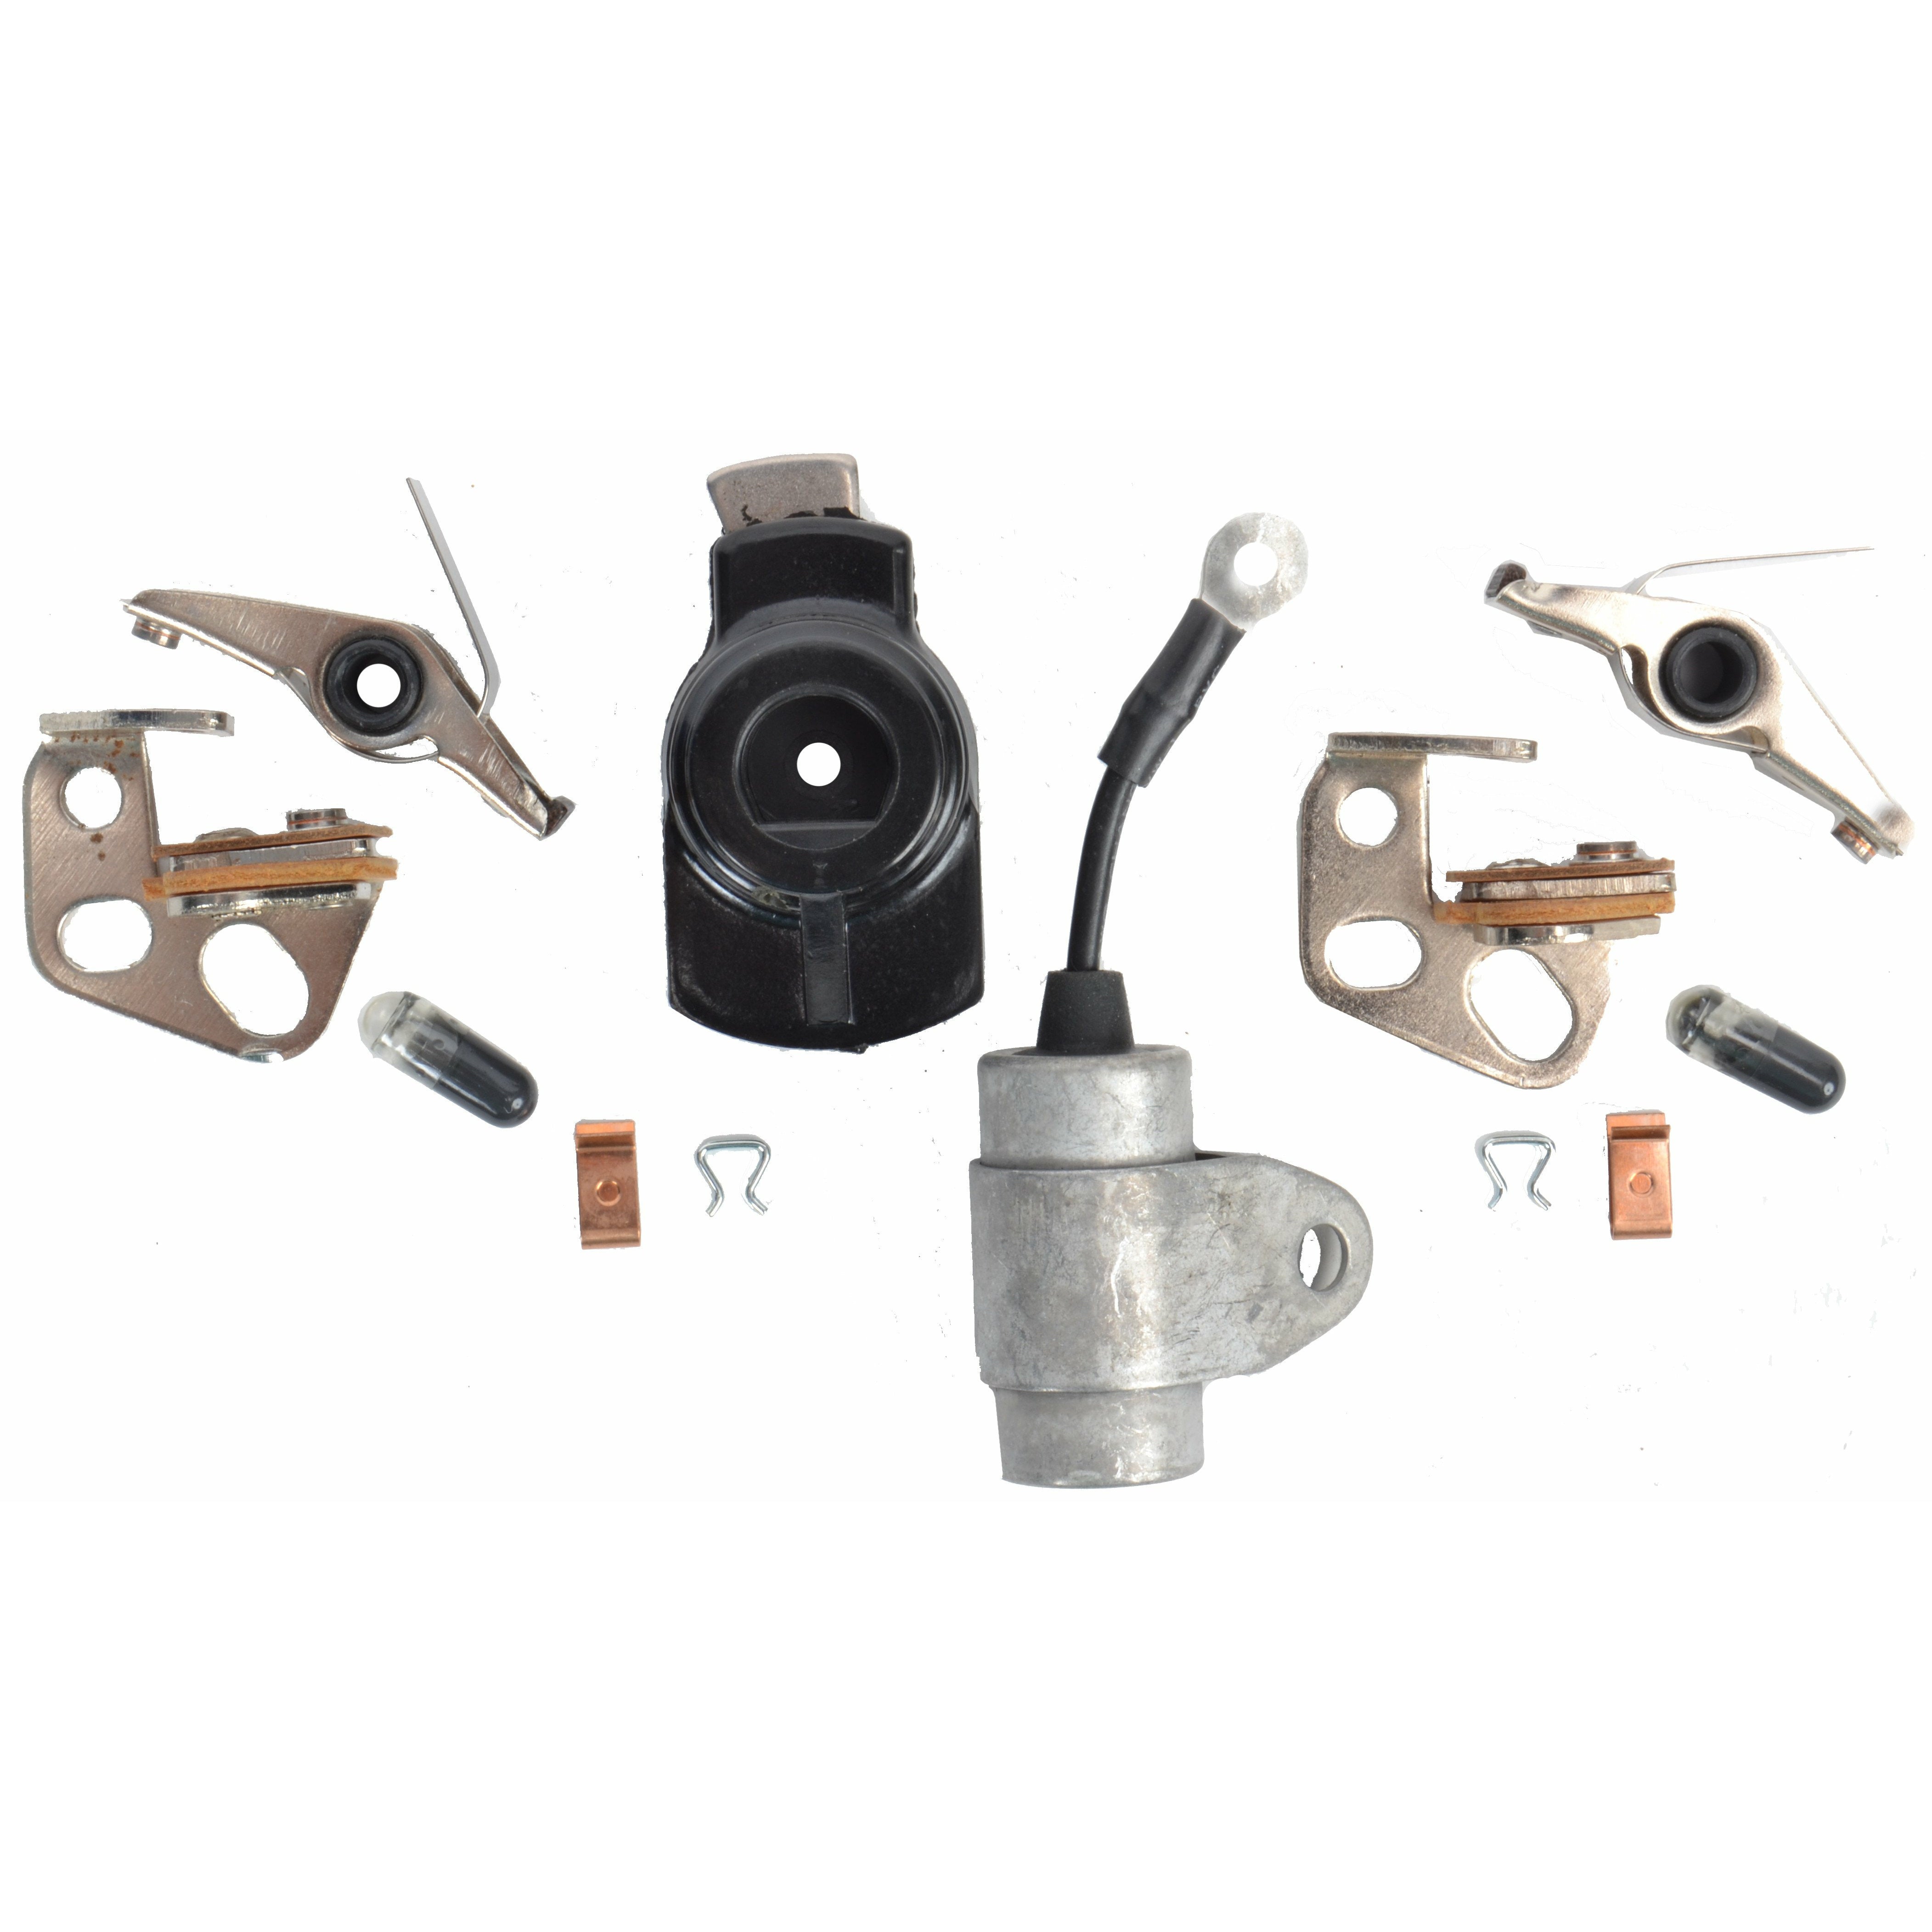 Evinrude Ignition Tune Up Kit 0172524